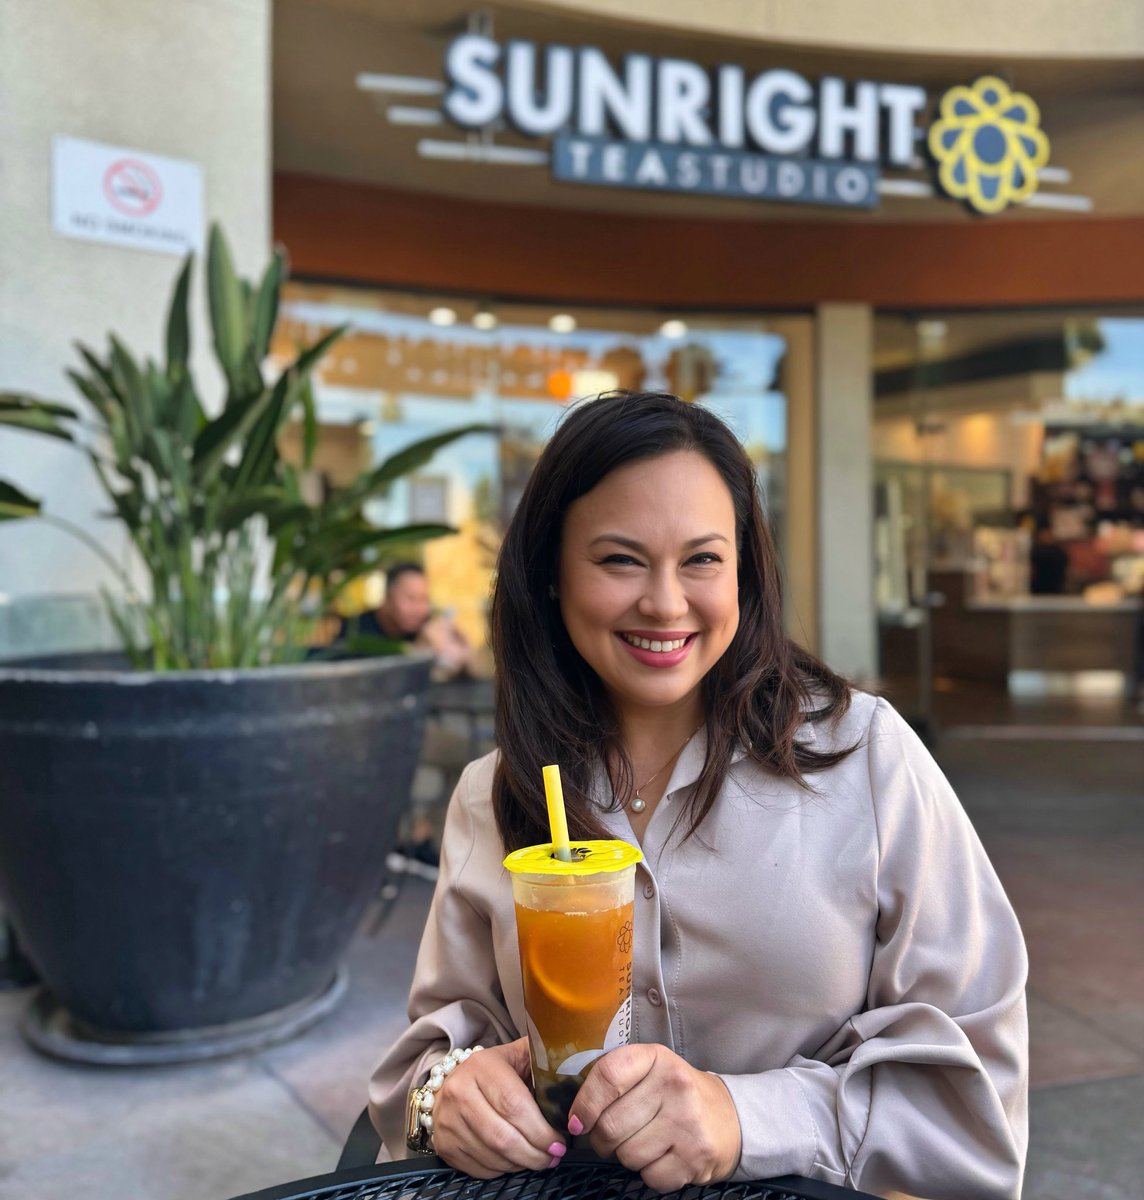 Happy National Bubble Tea Day! Sunright Tea Studio is one of my favorite boba shops in Irvine. They're located at Diamond and Jamboree - check them out! #WeAreIrvine #Irvine #Boba #NationalBubbleTeaDay #Tea